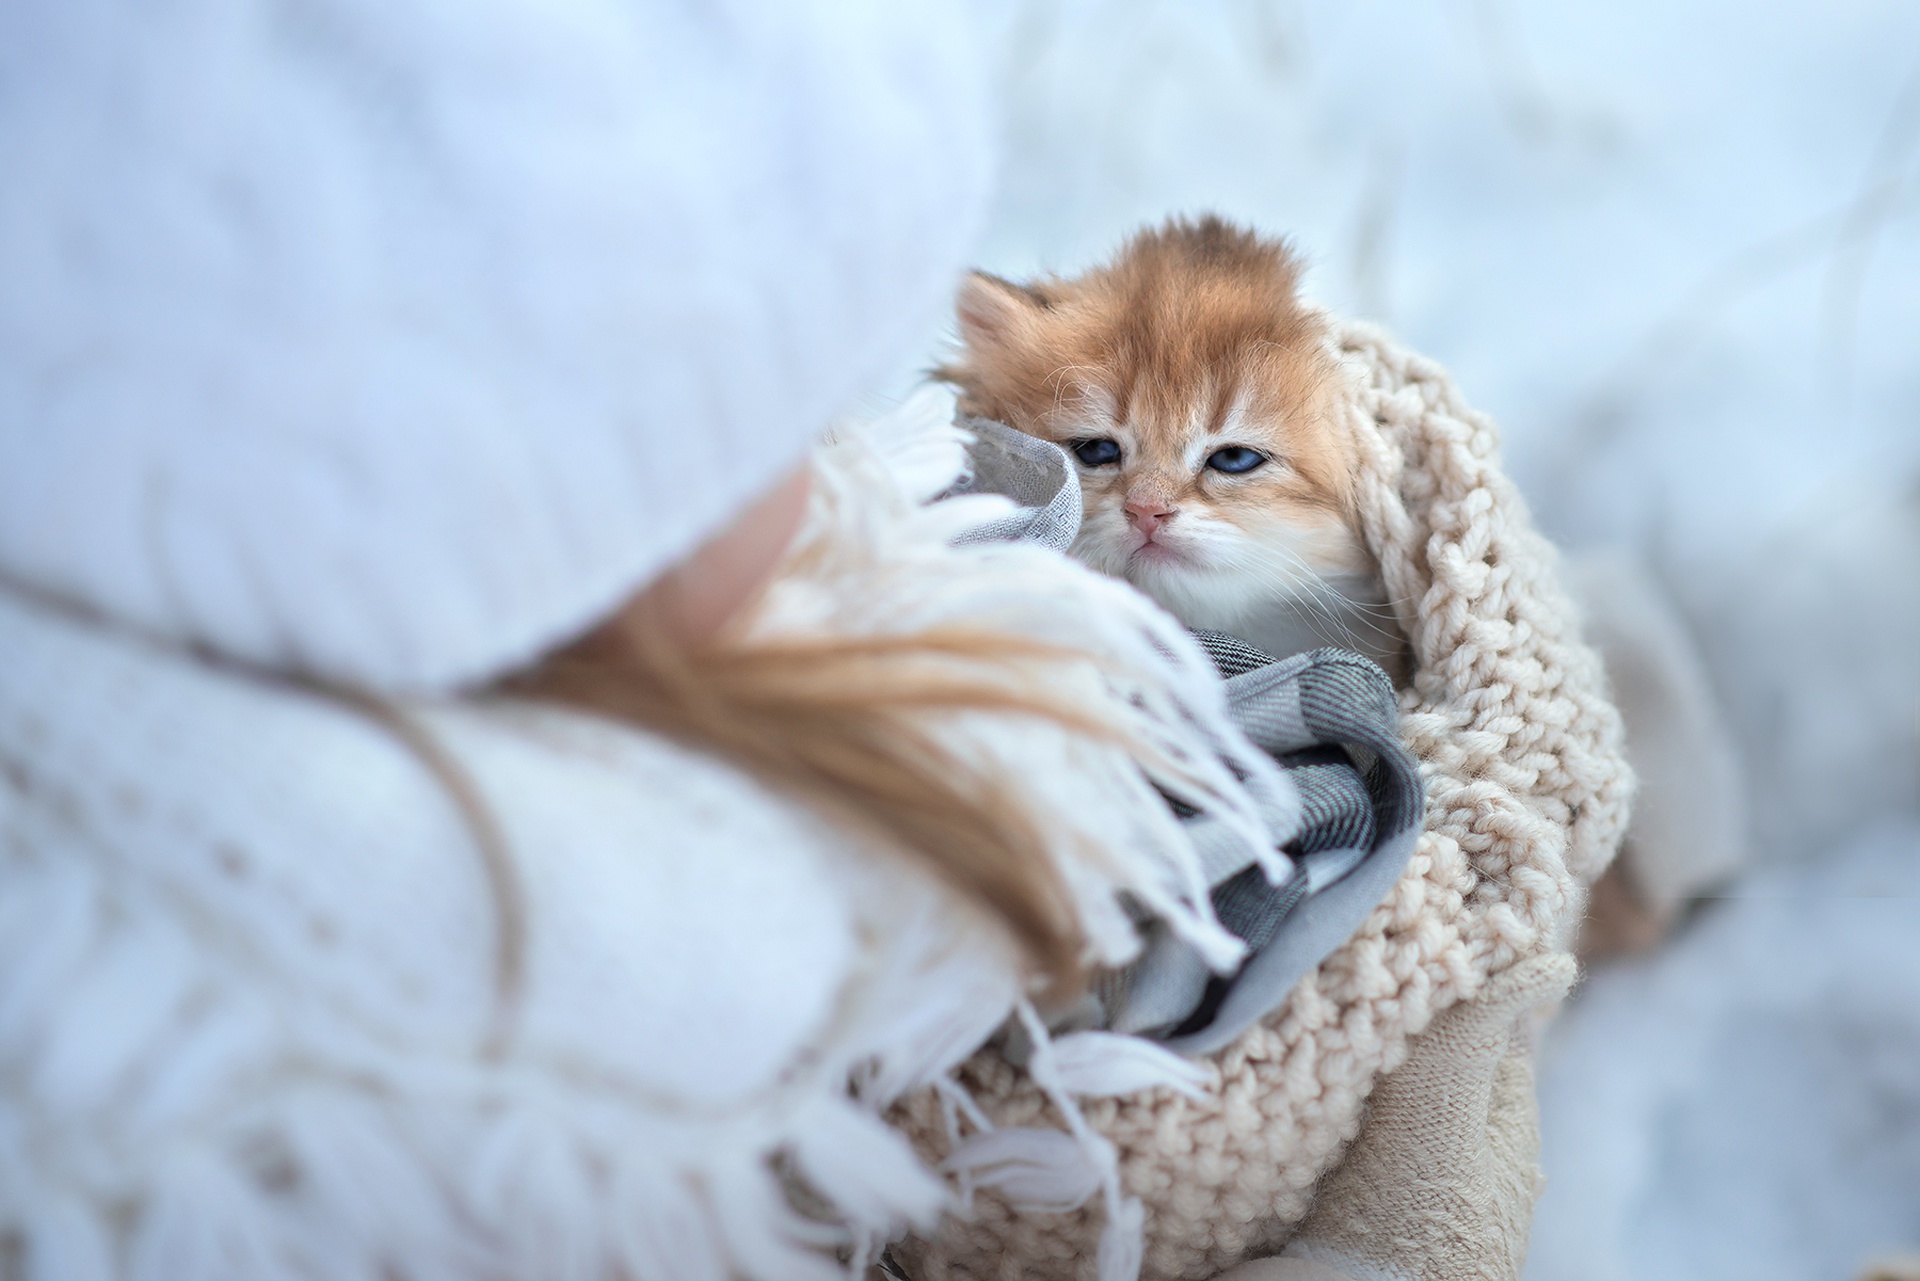 Caturday pic of a kitten held swathed in blankets